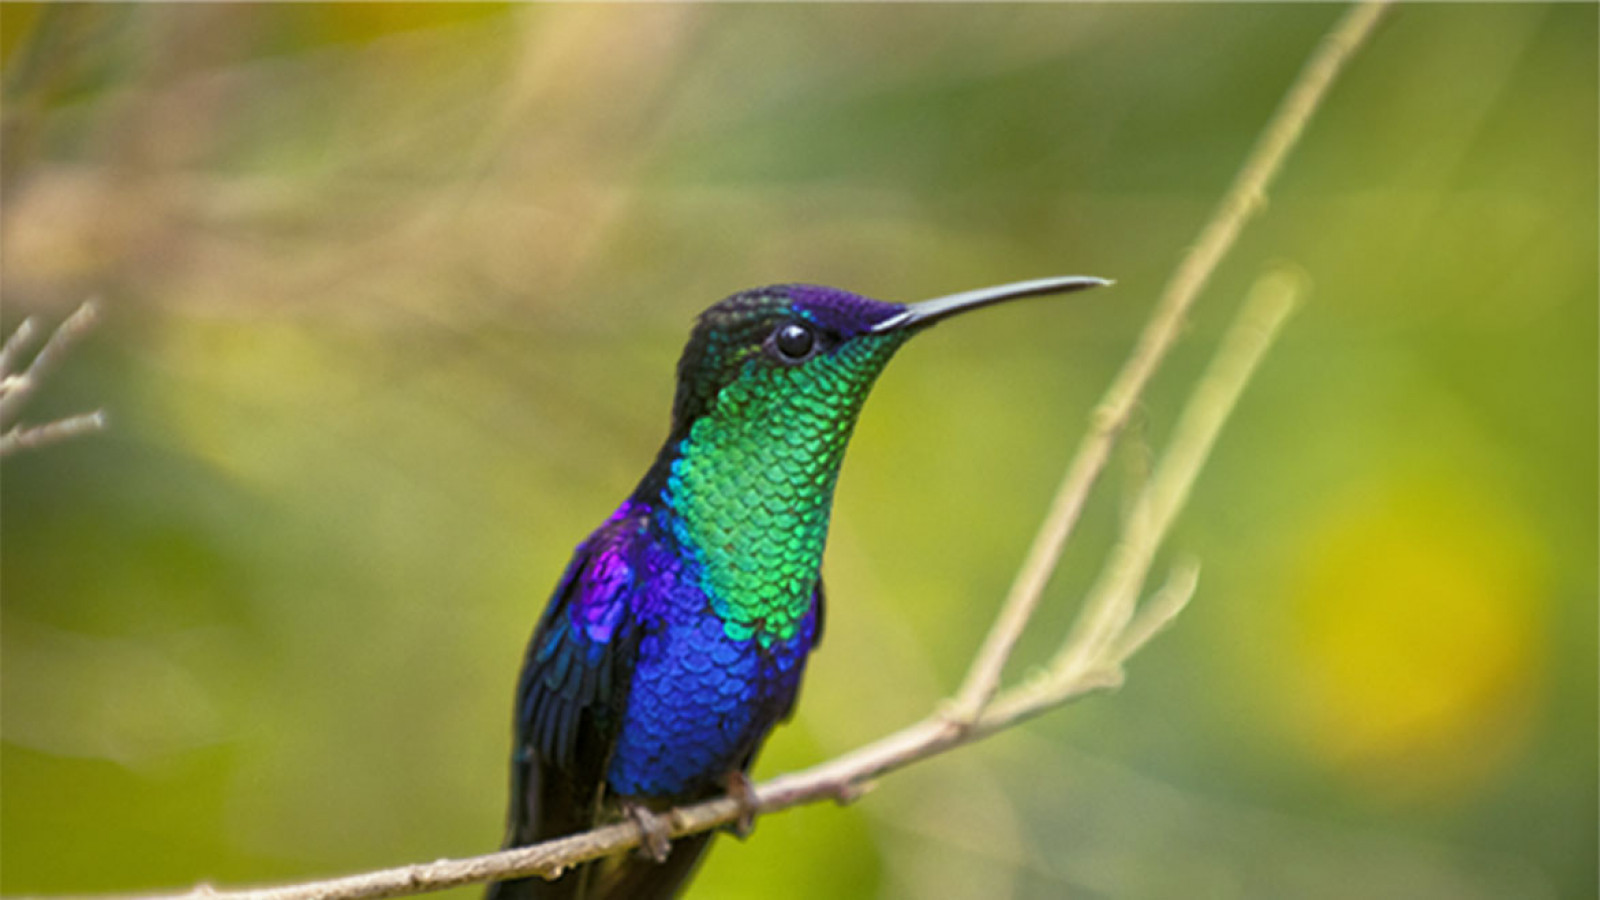 “The Birders: A Melodic Journey through Northern Colombia” by Gregg Bleakne